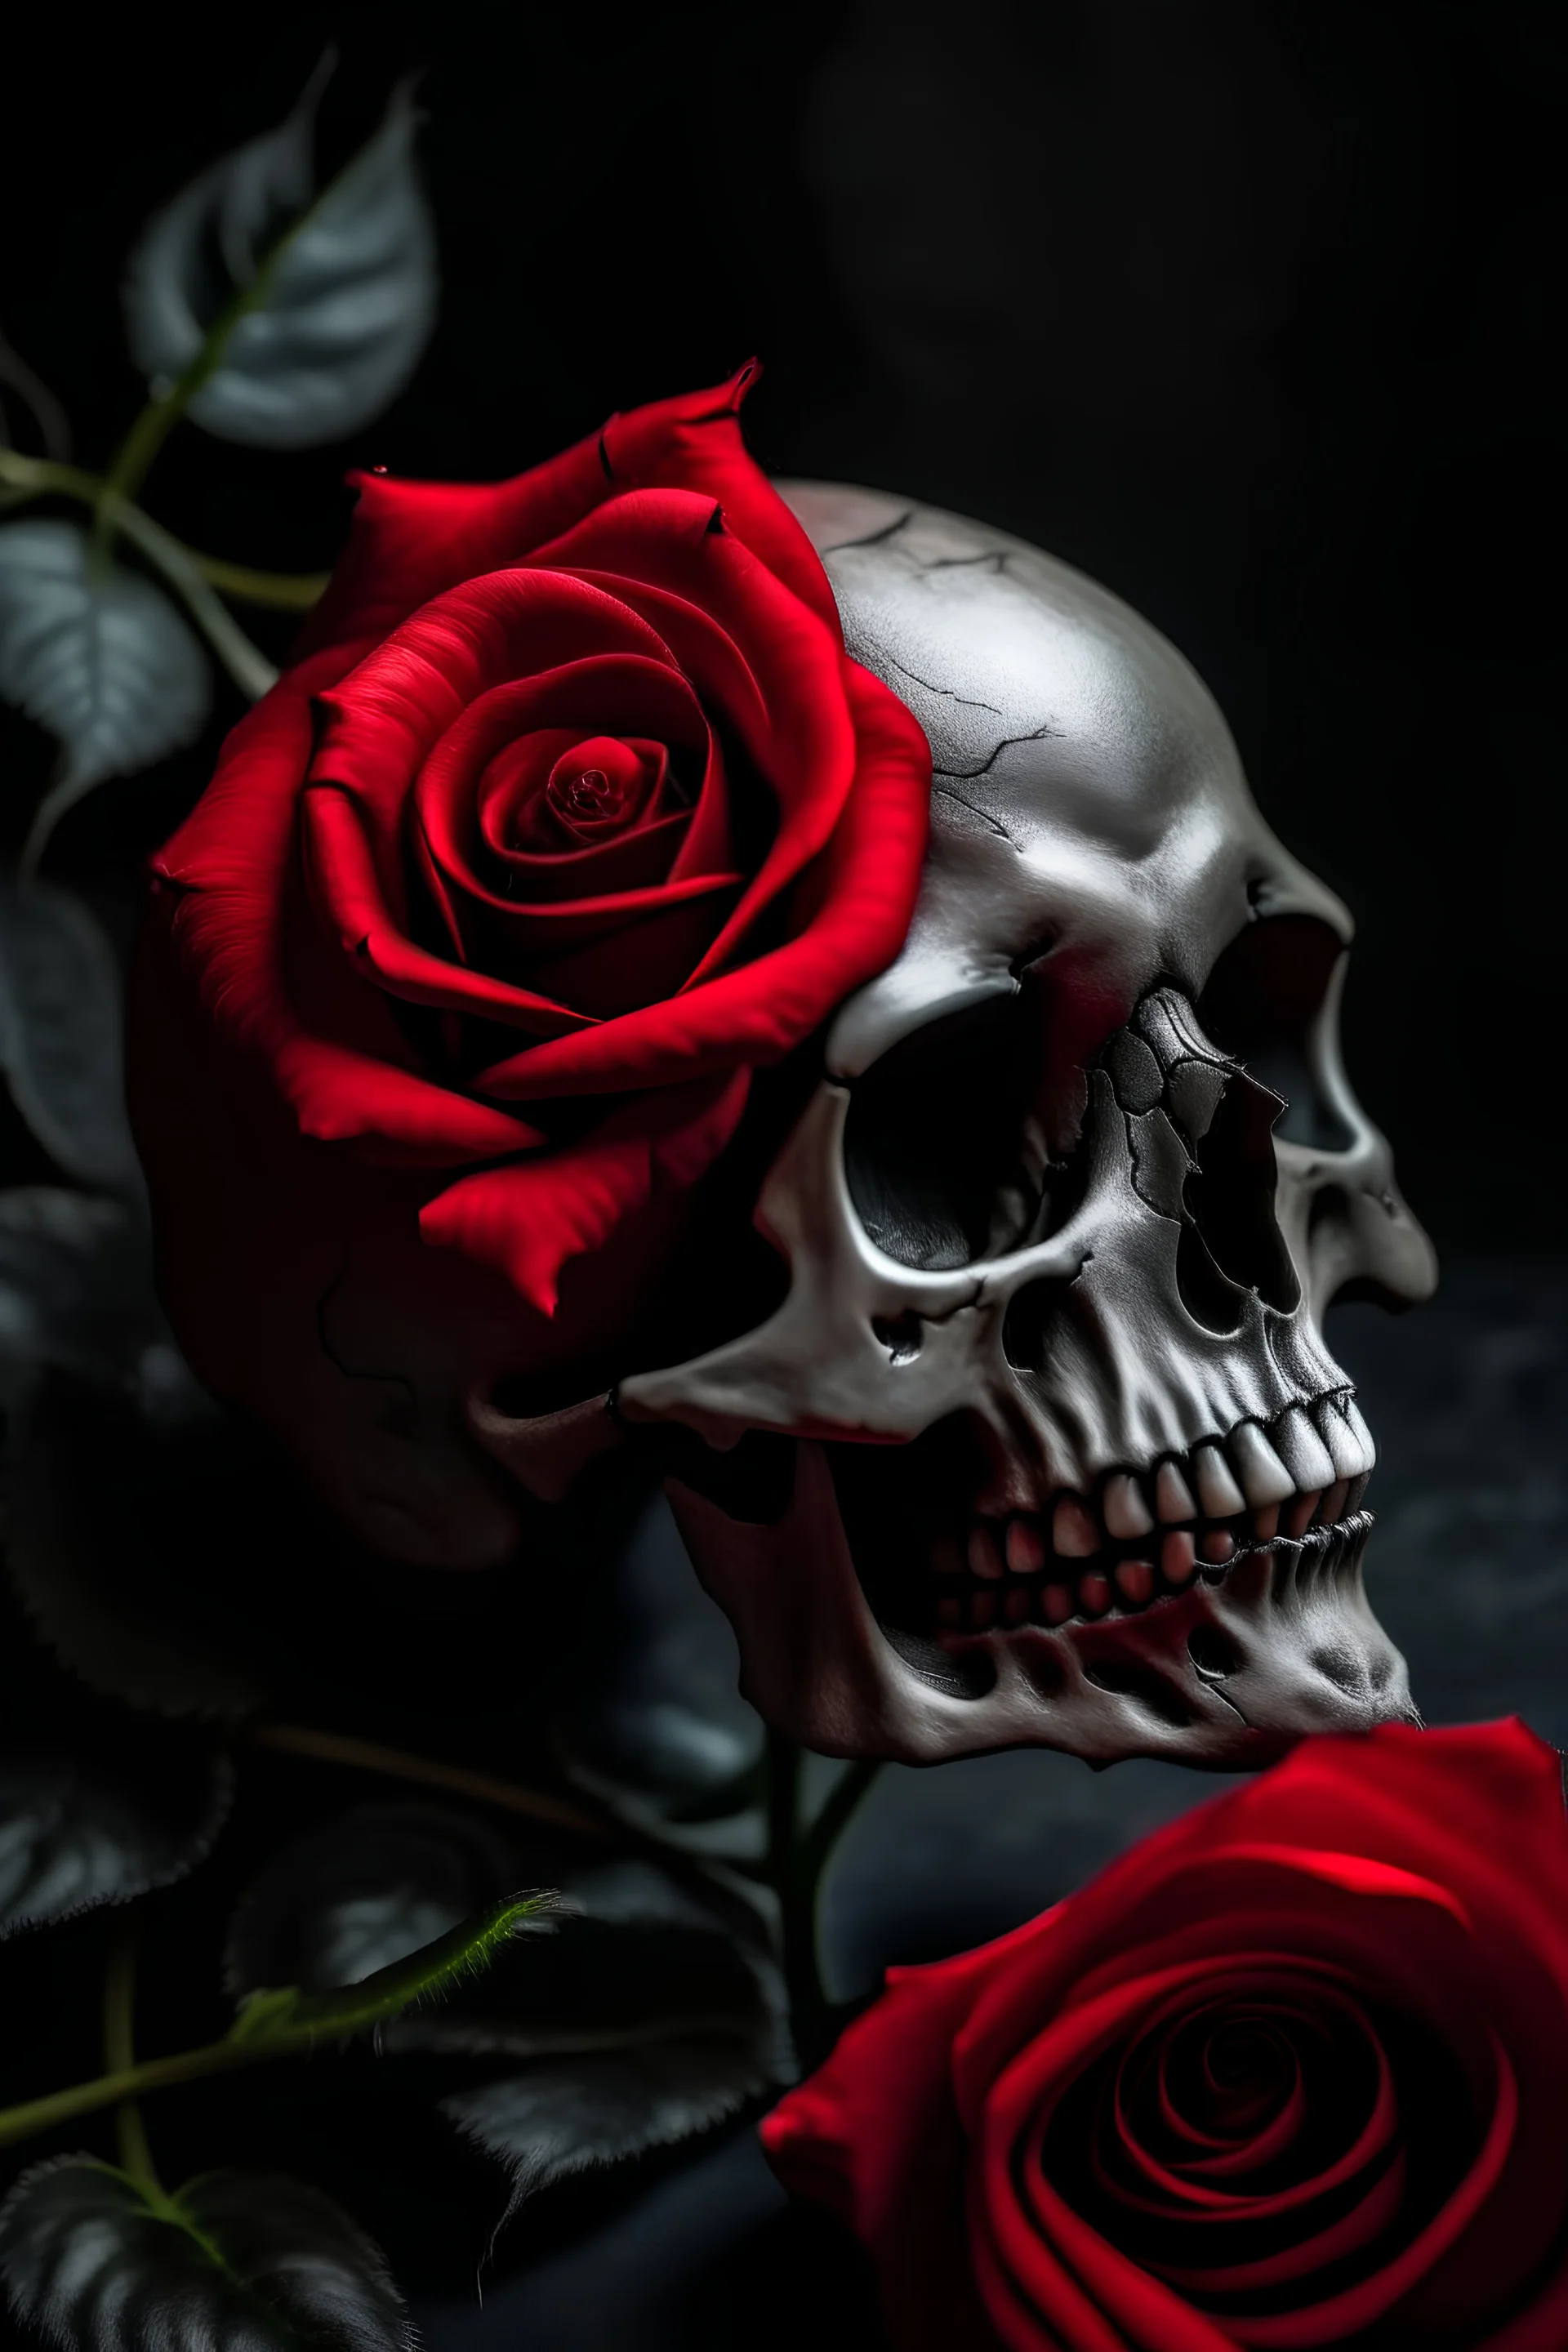 A red rose with a skull inside it